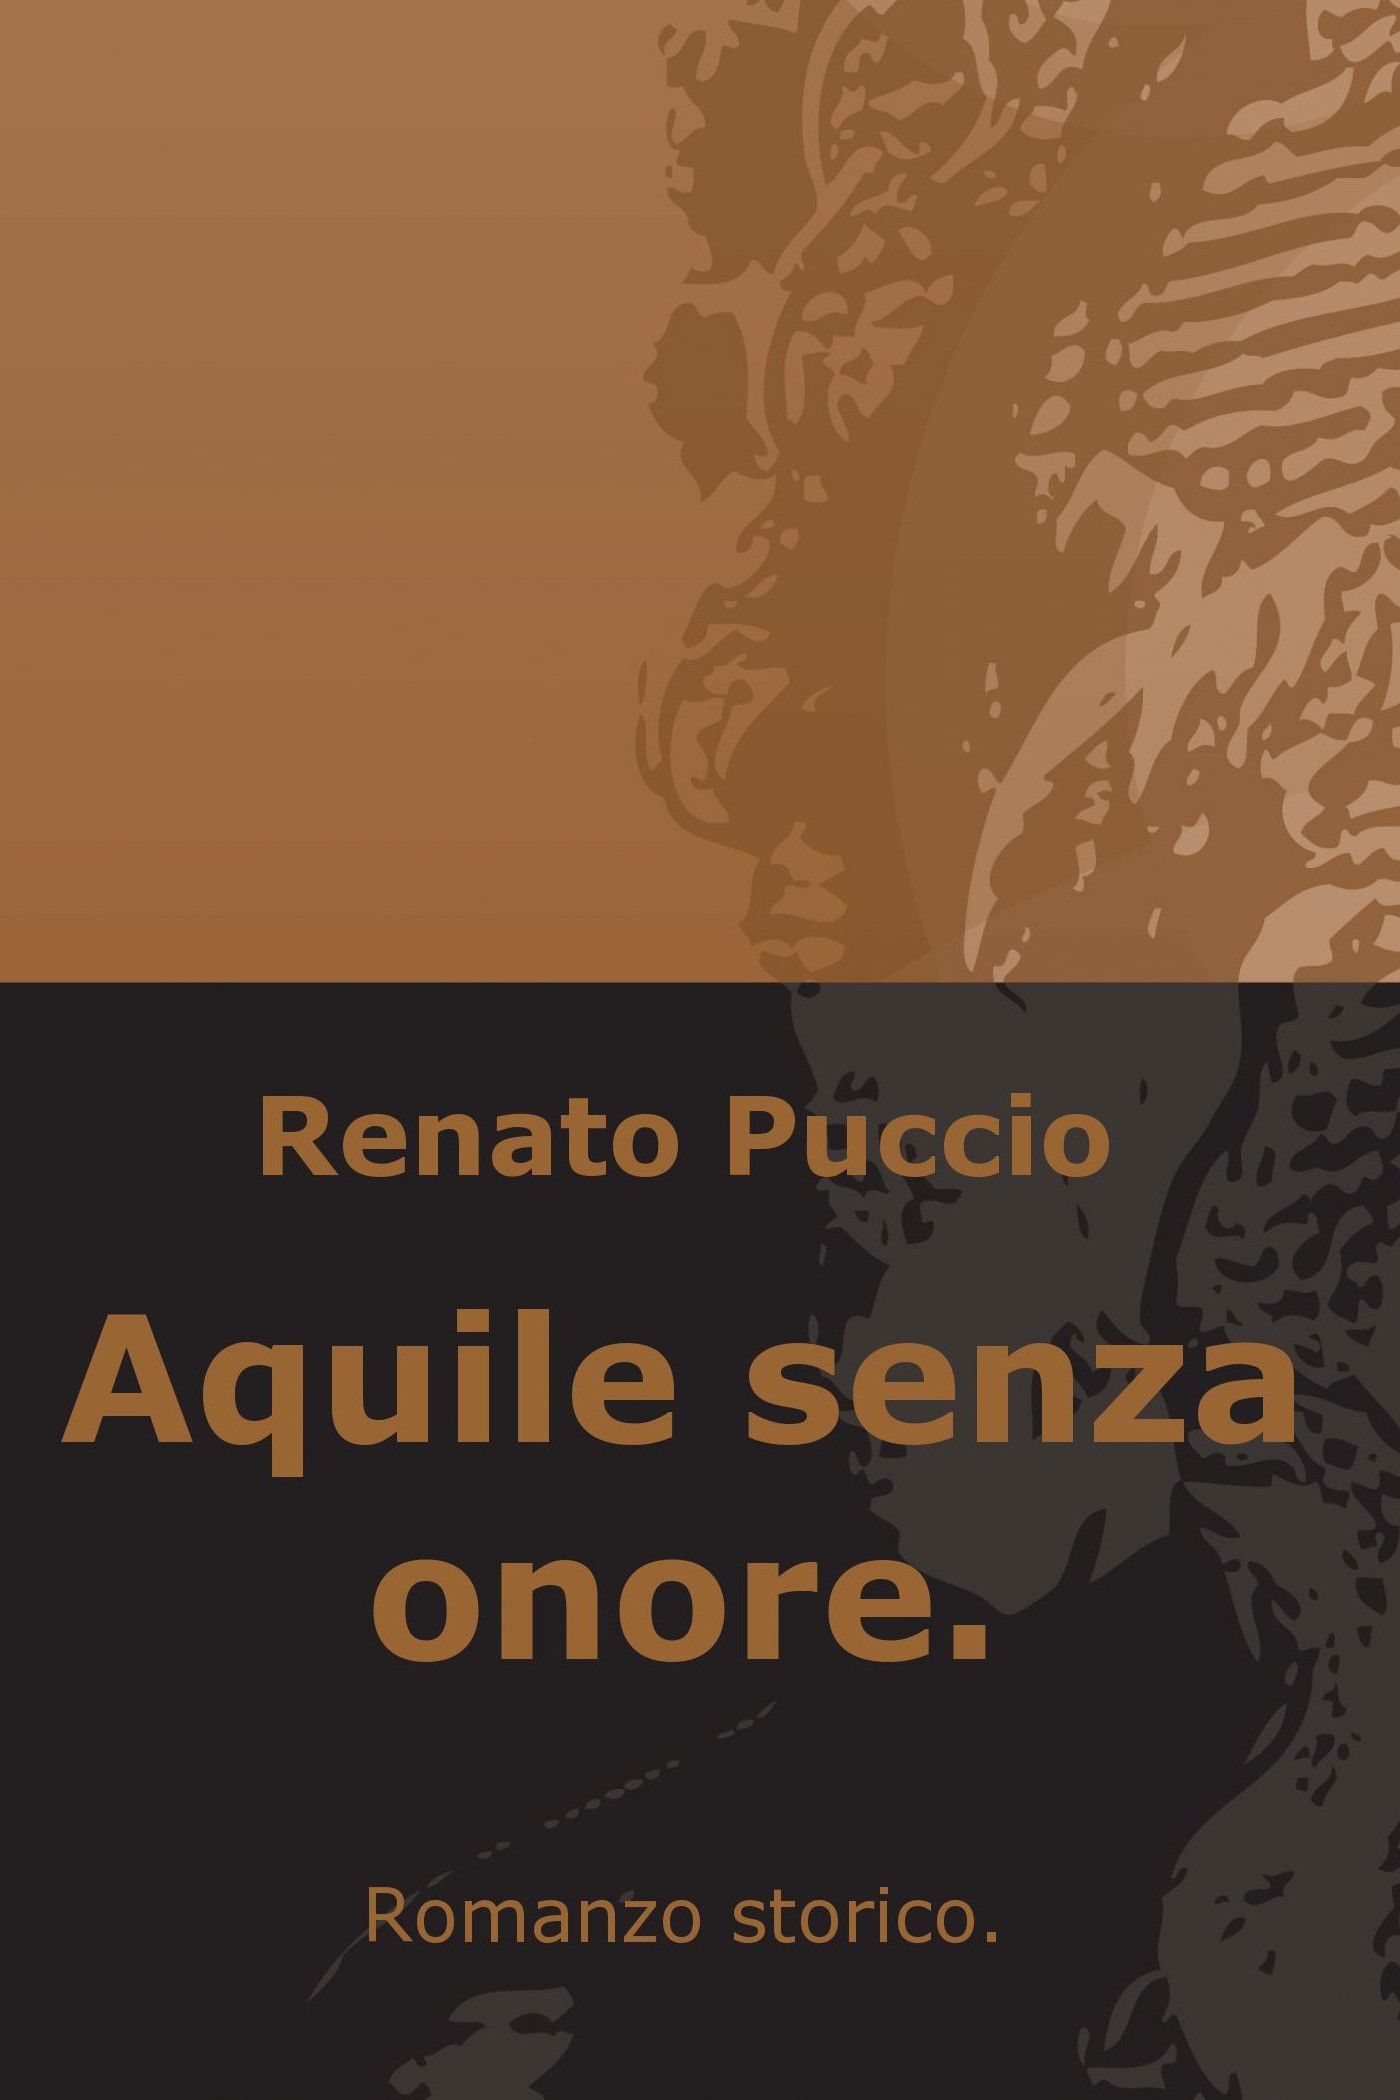 Aquile senza onore. - Librerie.coop